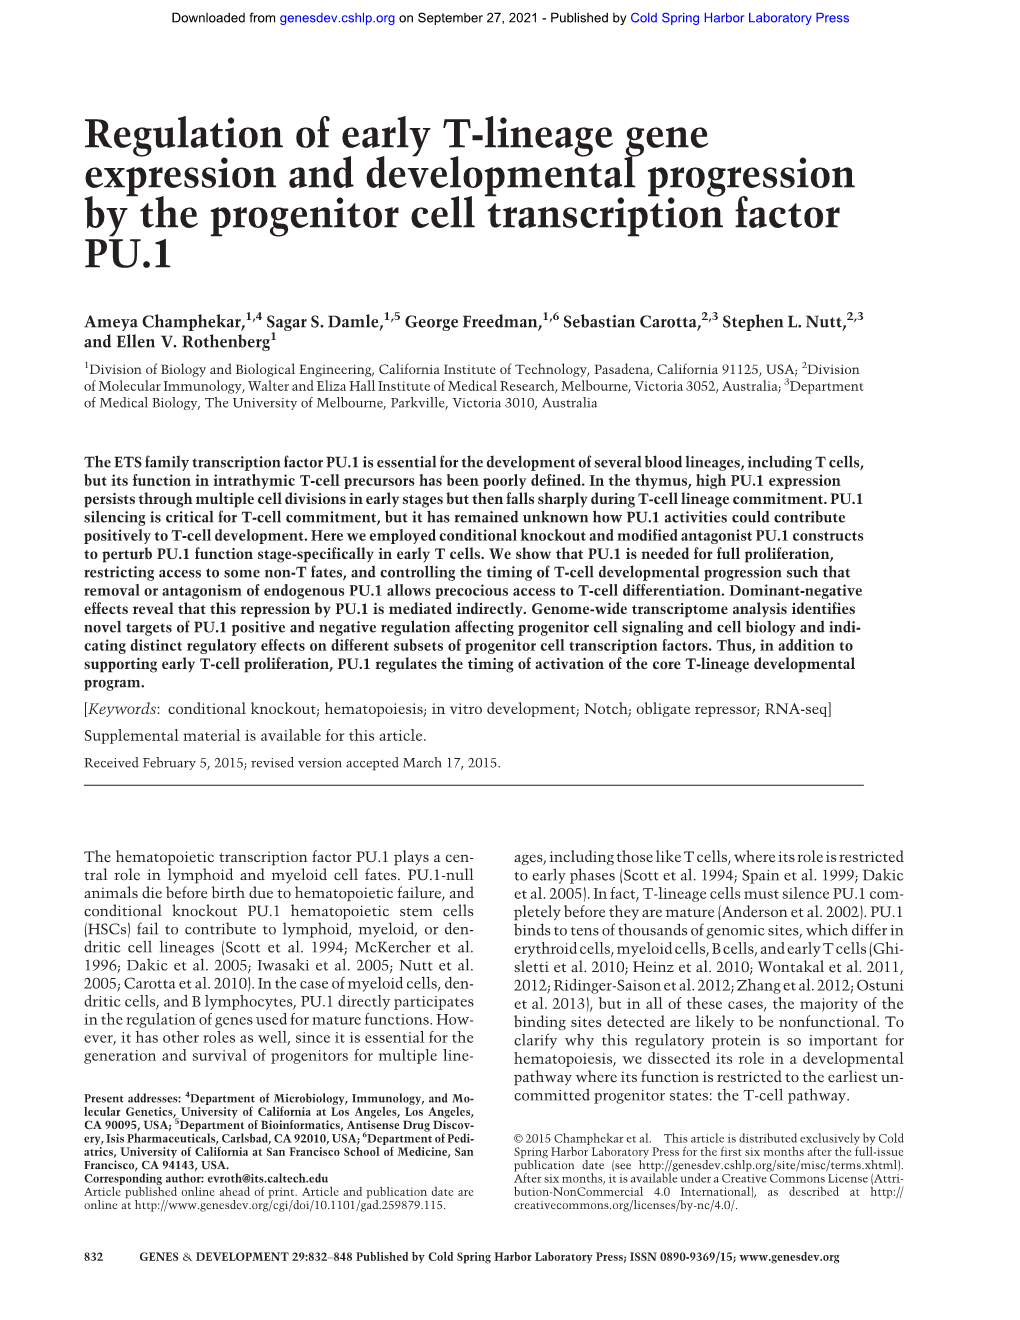 Regulation of Early T-Lineage Gene Expression and Developmental Progression by the Progenitor Cell Transcription Factor PU.1